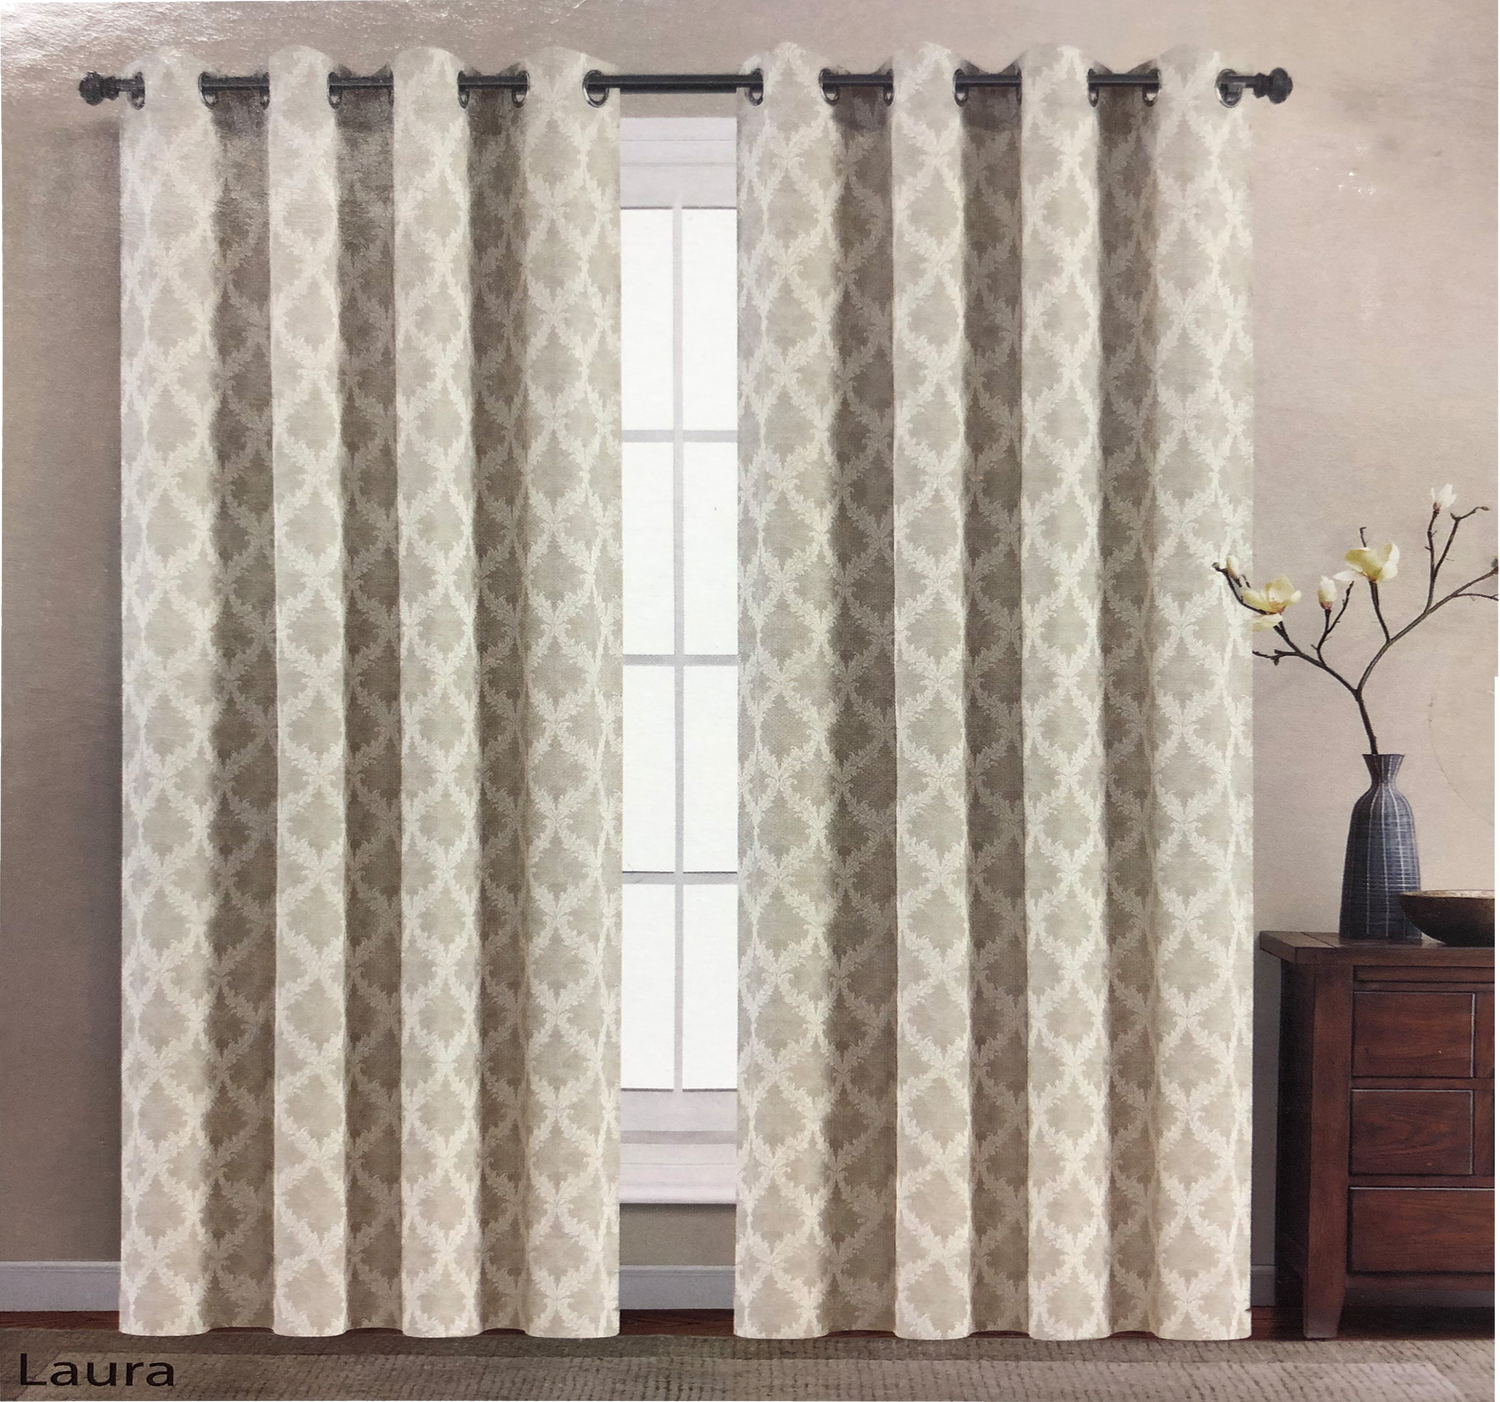 Laura Curtain Size: 54" x 90"